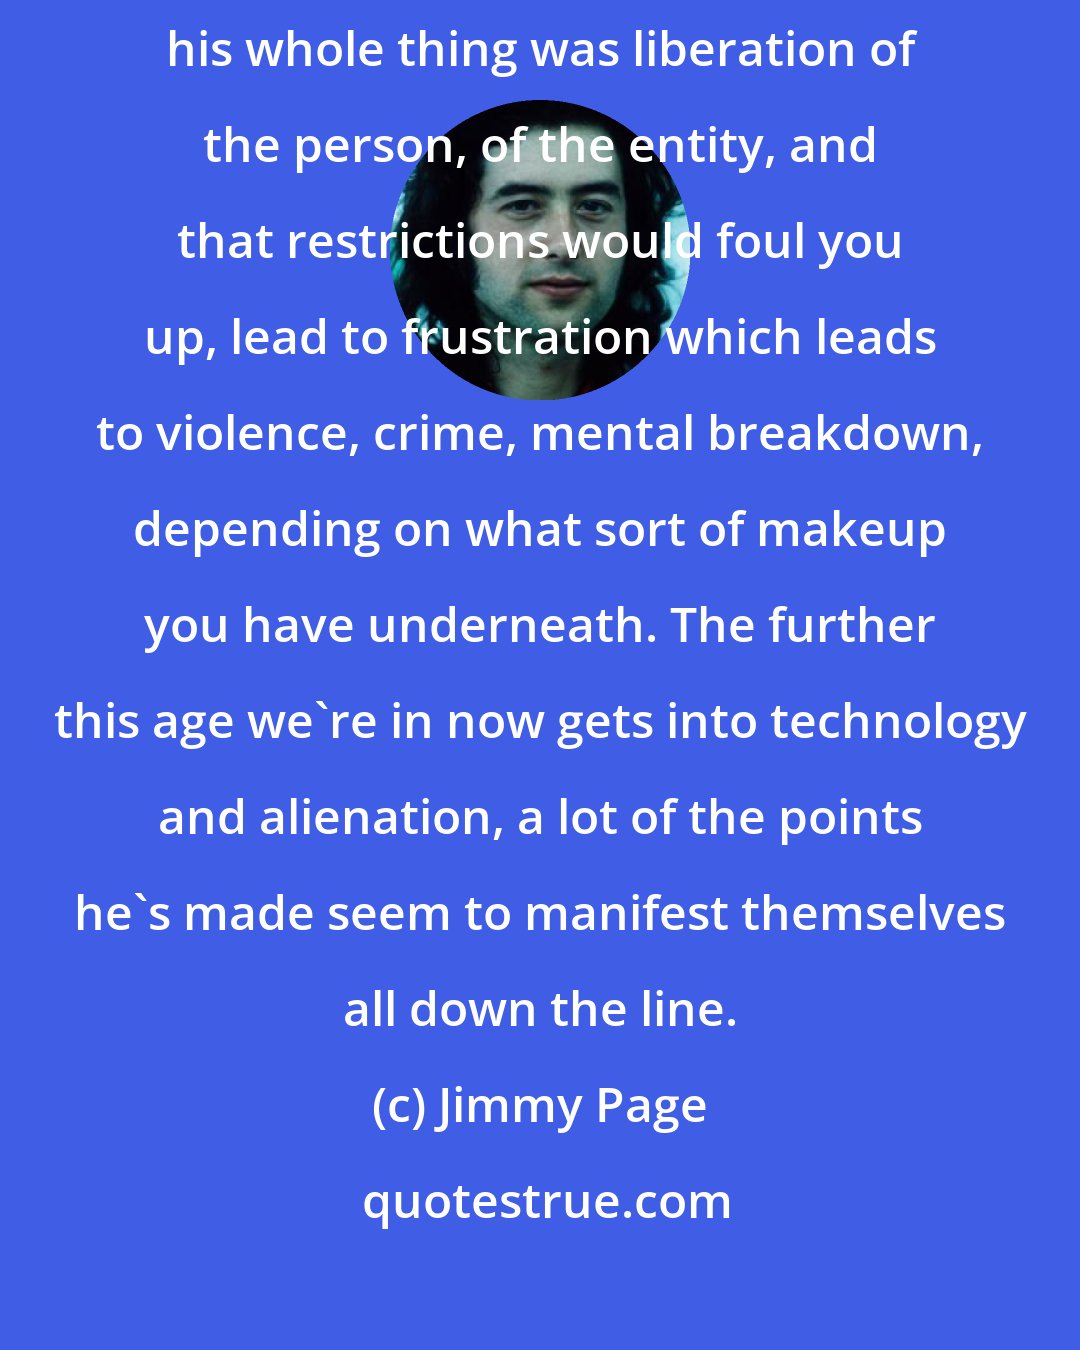 Jimmy Page: I feel Aleister Crowley is a misunderstood genius of the 20th century. Because his whole thing was liberation of the person, of the entity, and that restrictions would foul you up, lead to frustration which leads to violence, crime, mental breakdown, depending on what sort of makeup you have underneath. The further this age we're in now gets into technology and alienation, a lot of the points he's made seem to manifest themselves all down the line.